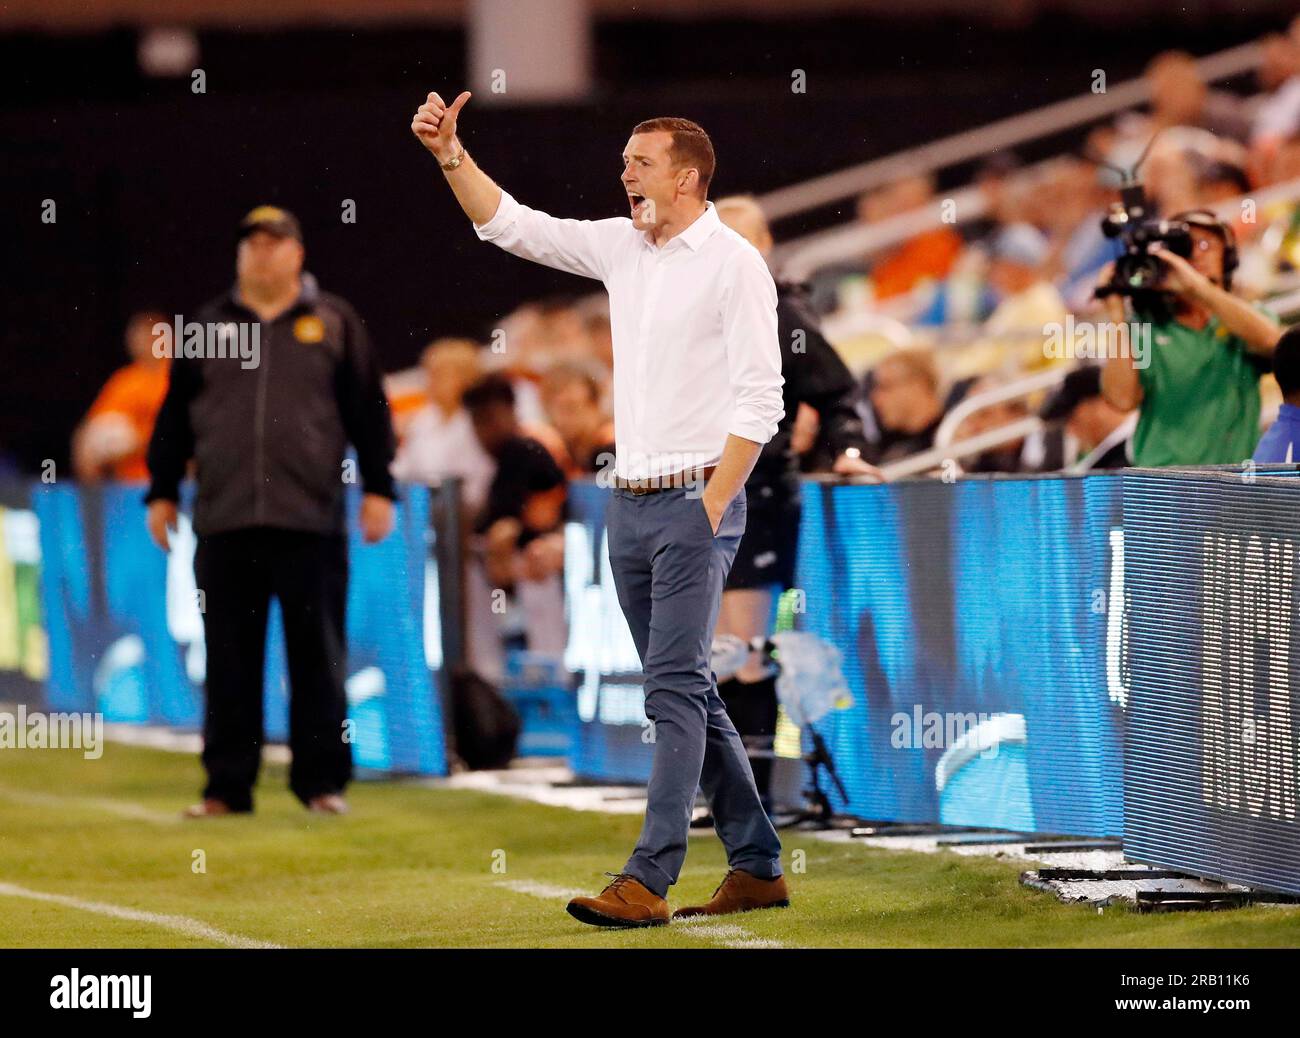 MAY 19, 2018 - ST. PETERSBURG, FLORIDA: The Tampa Bay Rowdies Head Coach Neill Collins during a match against the Pittsburgh Riverhounds at Al Lang Field. Collins was named the Head Coach at Barnsley F.C. on July 6, 2023. Stock Photo